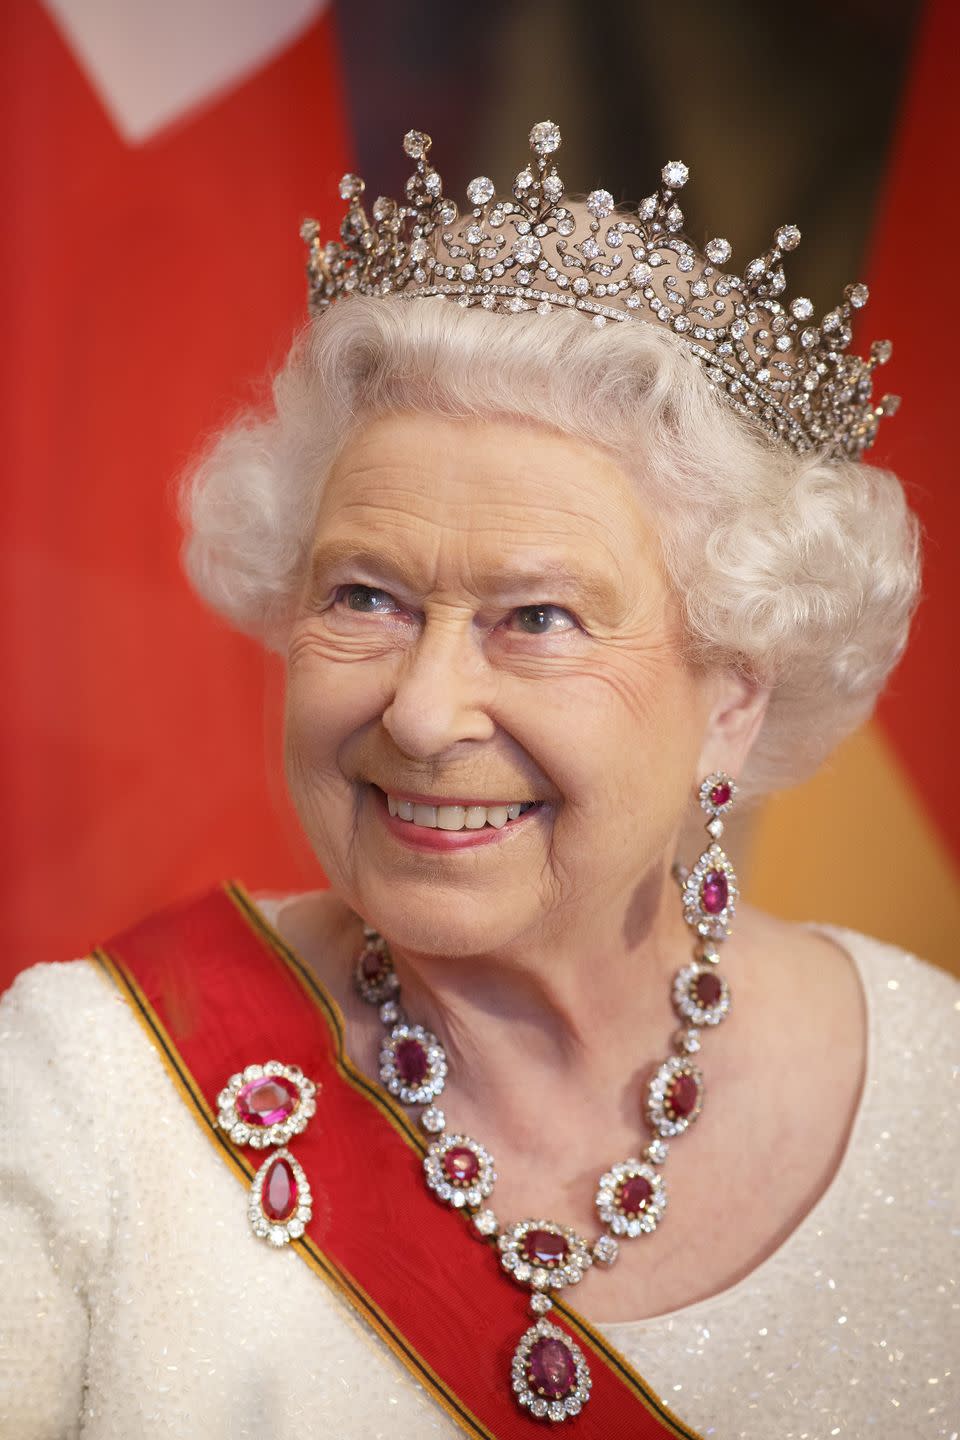 <p>The Girls of Great Britain and Ireland tiara is the headpiece most frequently worn by the Queen–it's even featured in her portrait on British currency. The tiara was a wedding gift from her grandmother, Queen Mary, and the first she owned herself. The tiara was originally a wedding gift for Mary when she married the Duke of York, who later became George V, in 1893. It was from the girls of Great Britain and Ireland, and commissioned by a committee lead by her friend, Lady Eve Greville.</p>